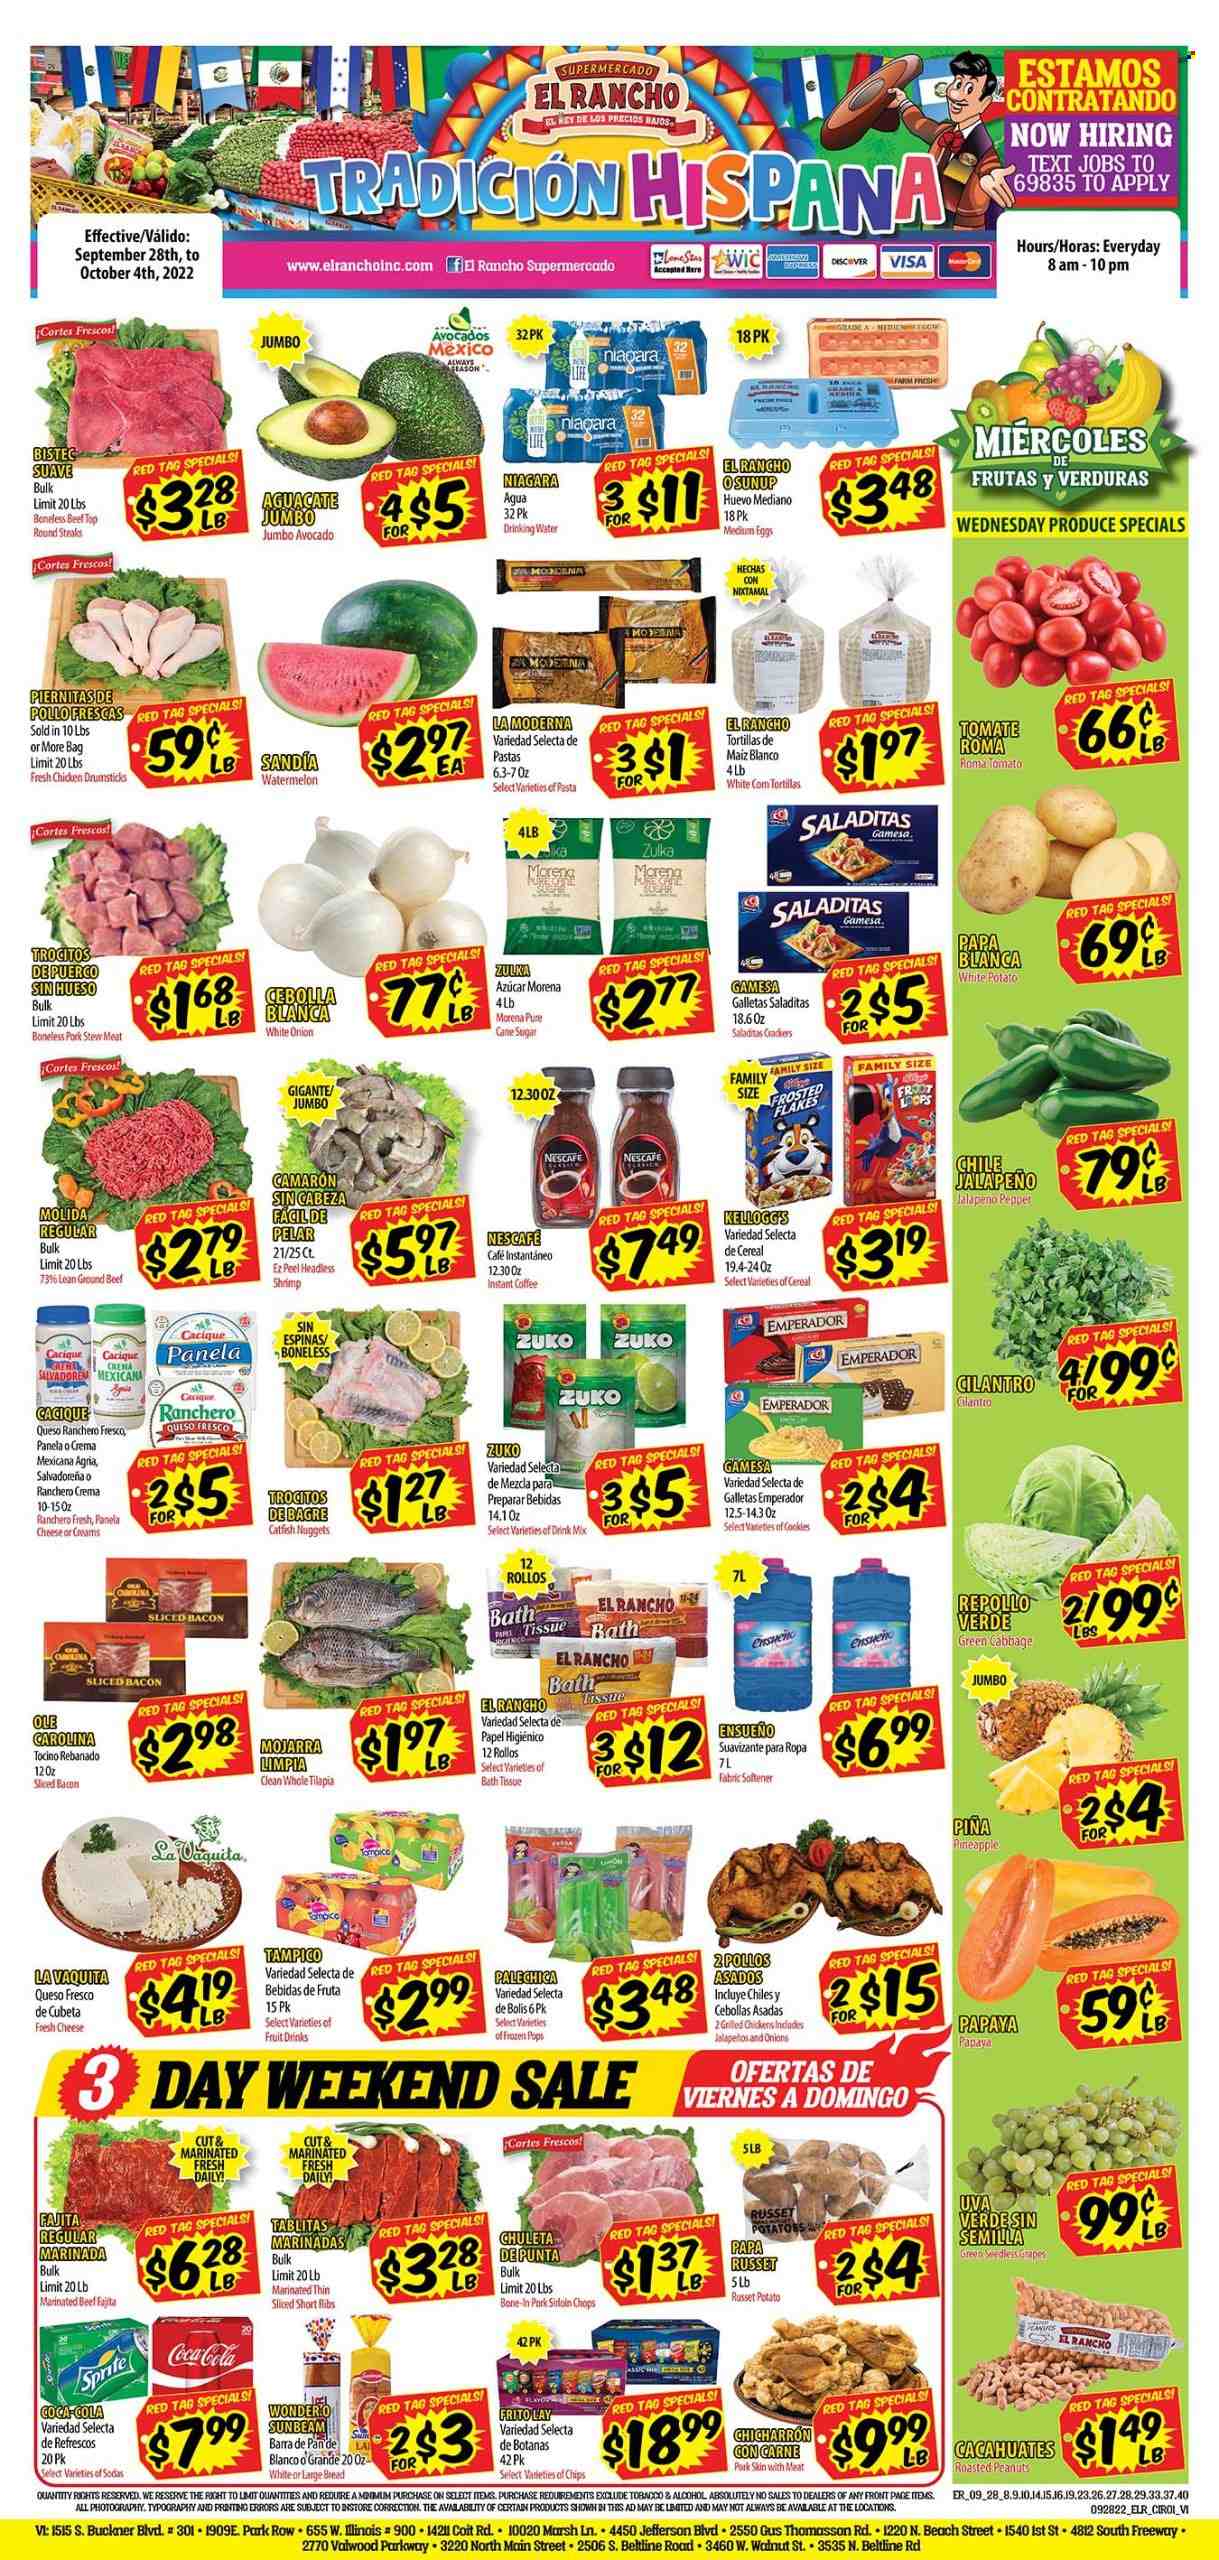 thumbnail - El Rancho Flyer - 09/28/2022 - 10/04/2022 - Sales products - stew meat, bread, tortillas, cabbage, russet potatoes, tomatoes, potatoes, jalapeño, avocado, grapes, seedless grapes, watermelon, pineapple, papaya, catfish, tilapia, shrimps, catfish nuggets, pasta, fajita, bacon, queso fresco, Panela cheese, eggs, cookies, crackers, Kellogg's, cane sugar, sugar, cereals, Frosted Flakes, cilantro, roasted peanuts, peanuts, Coca-Cola, Sprite, fruit punch, instant coffee, Nescafé, alcohol, chicken drumsticks, beef meat, ground beef, steak, marinated beef, pork loin. Page 1.